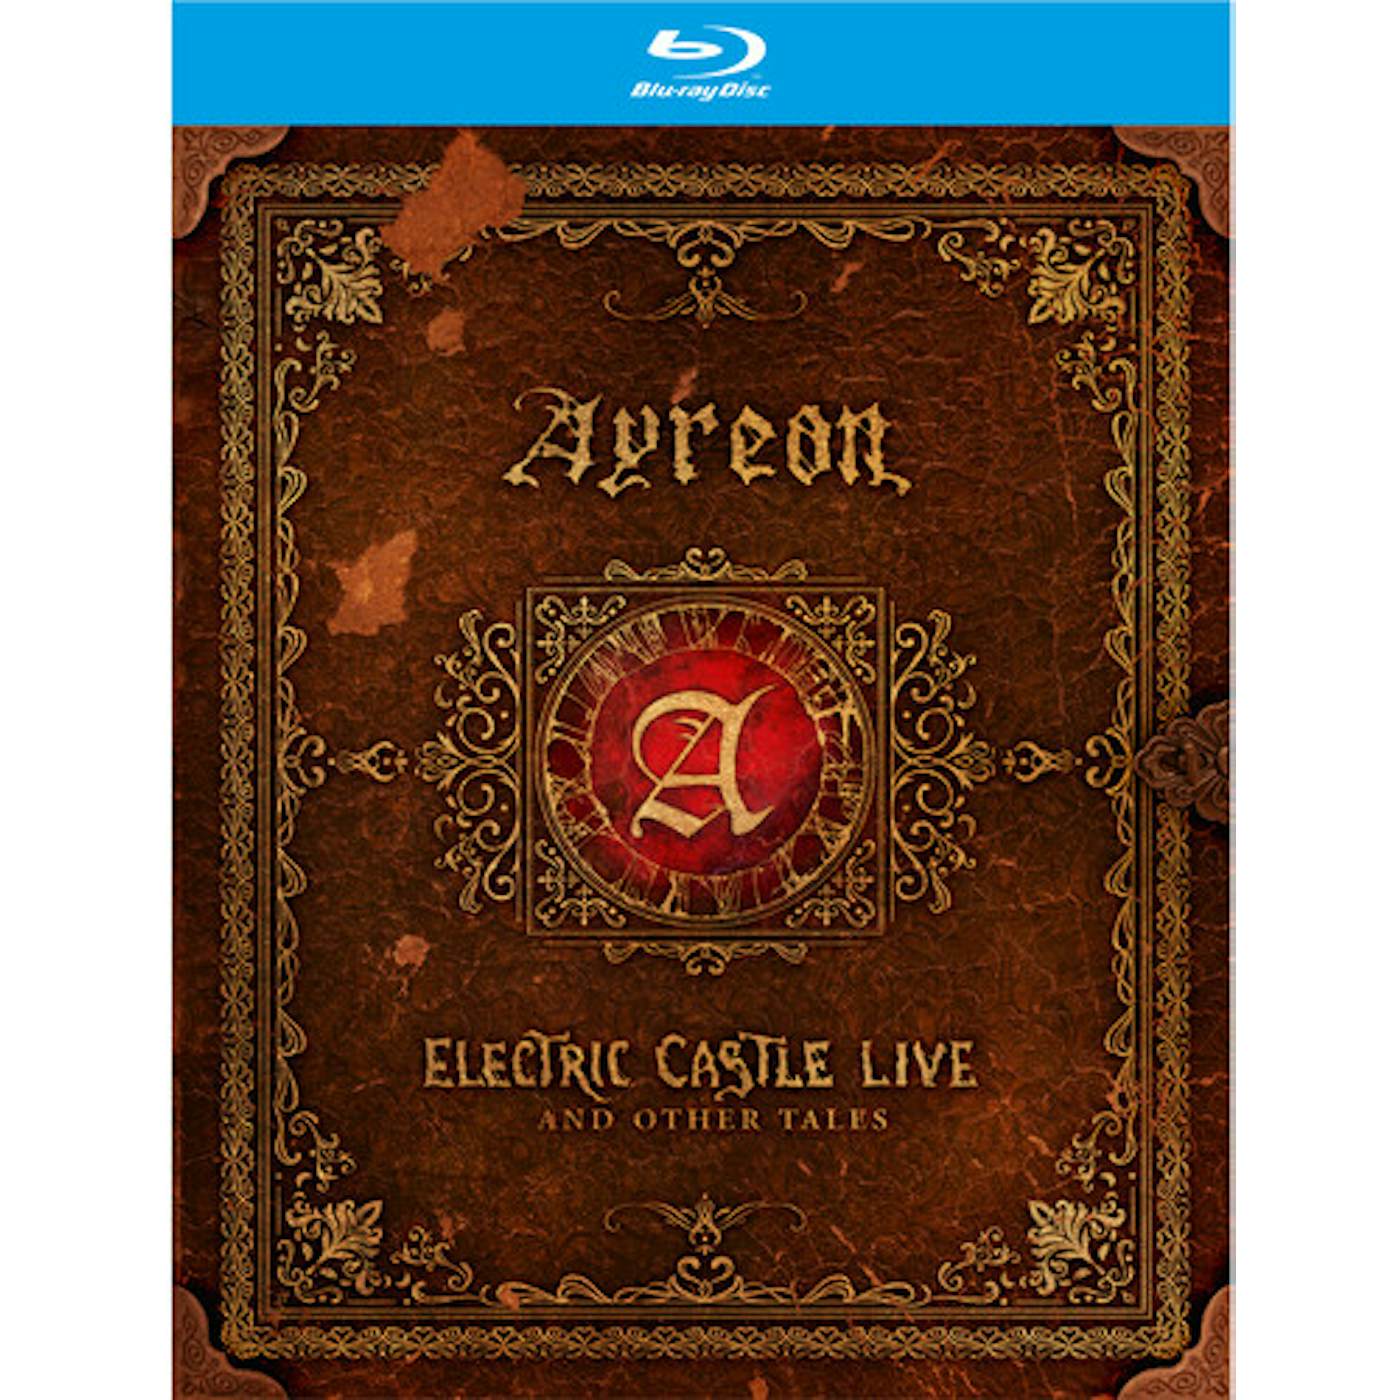 Ayreon ELECTRIC CASTLE LIVE AND OTHER TALES Blu-ray